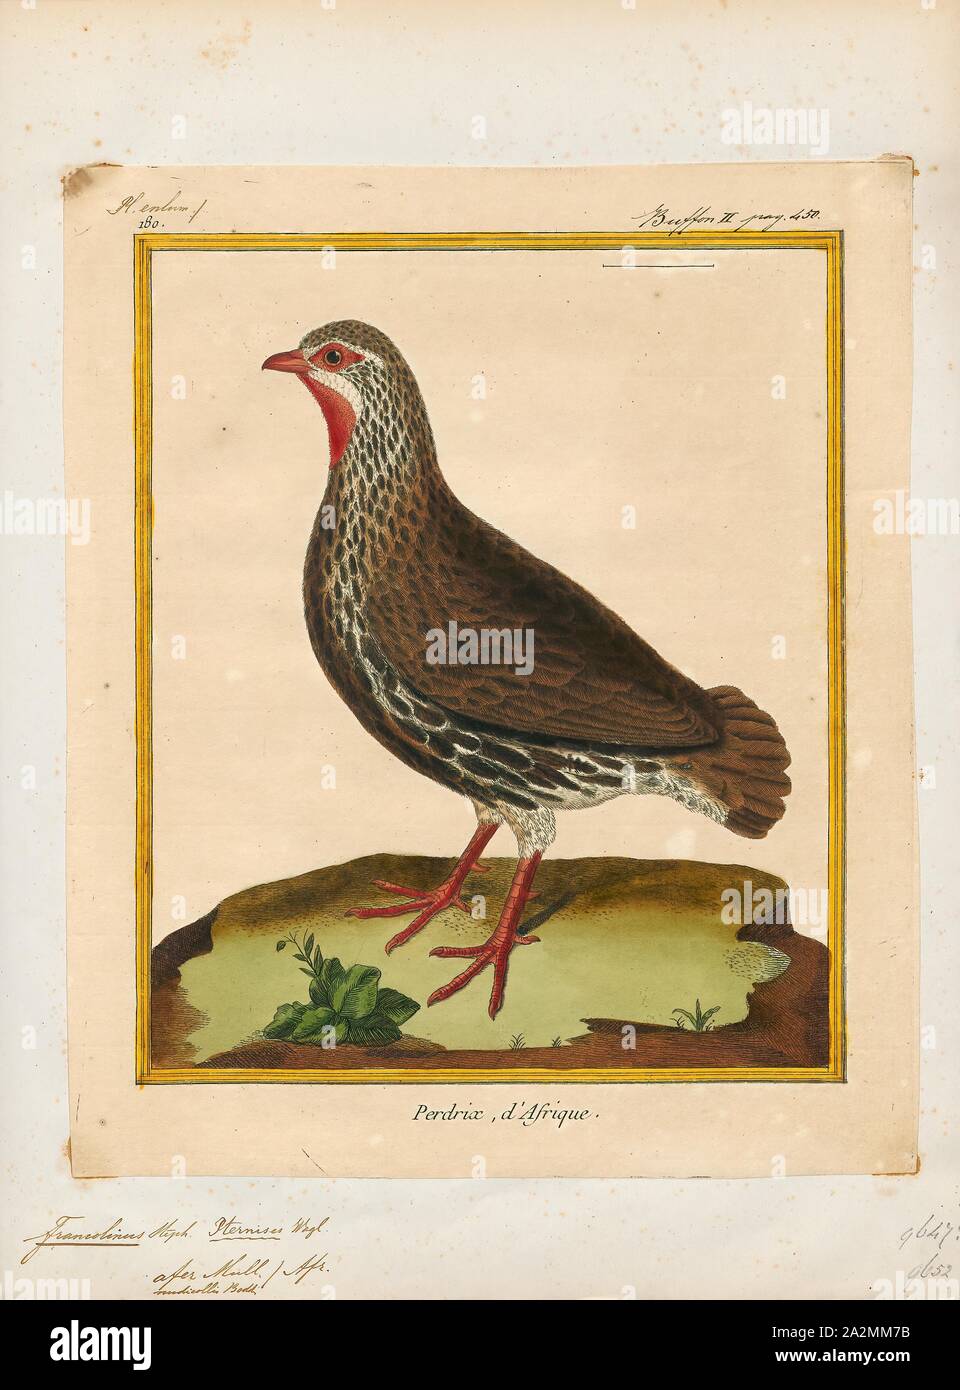 Francolinus afer, Print, The red-necked spurfowl or red-necked francolin (Pternistis afer), is a gamebird in the pheasant family Phasianidae of the order Galliformes, gallinaceous birds., 1700-1880 Stock Photo